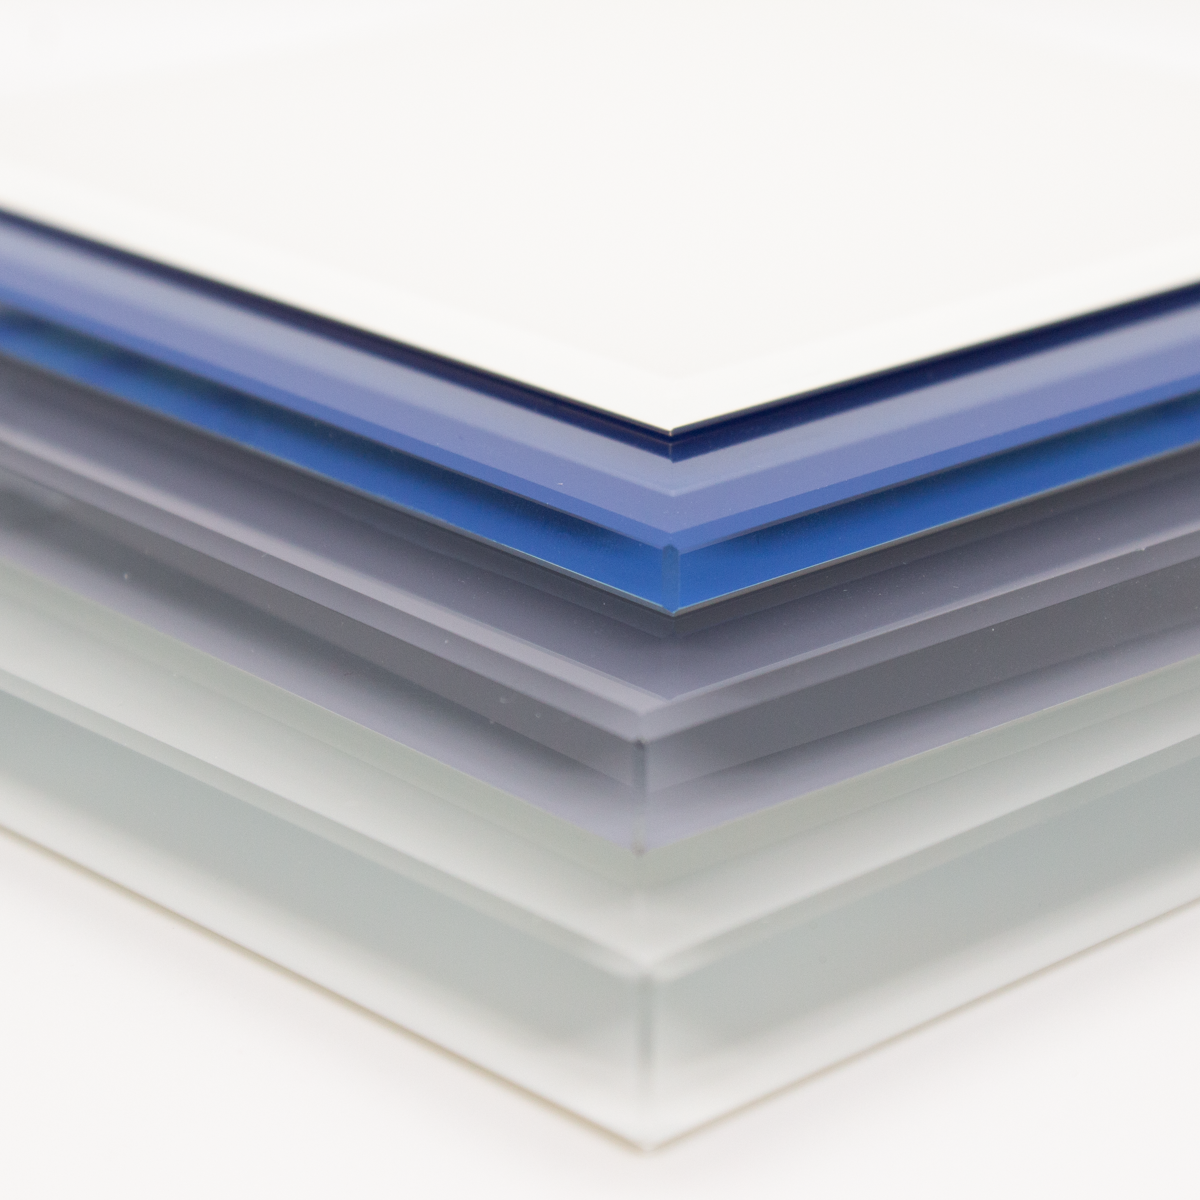 6mm Non-Standard Color Glass Samples - Gloss